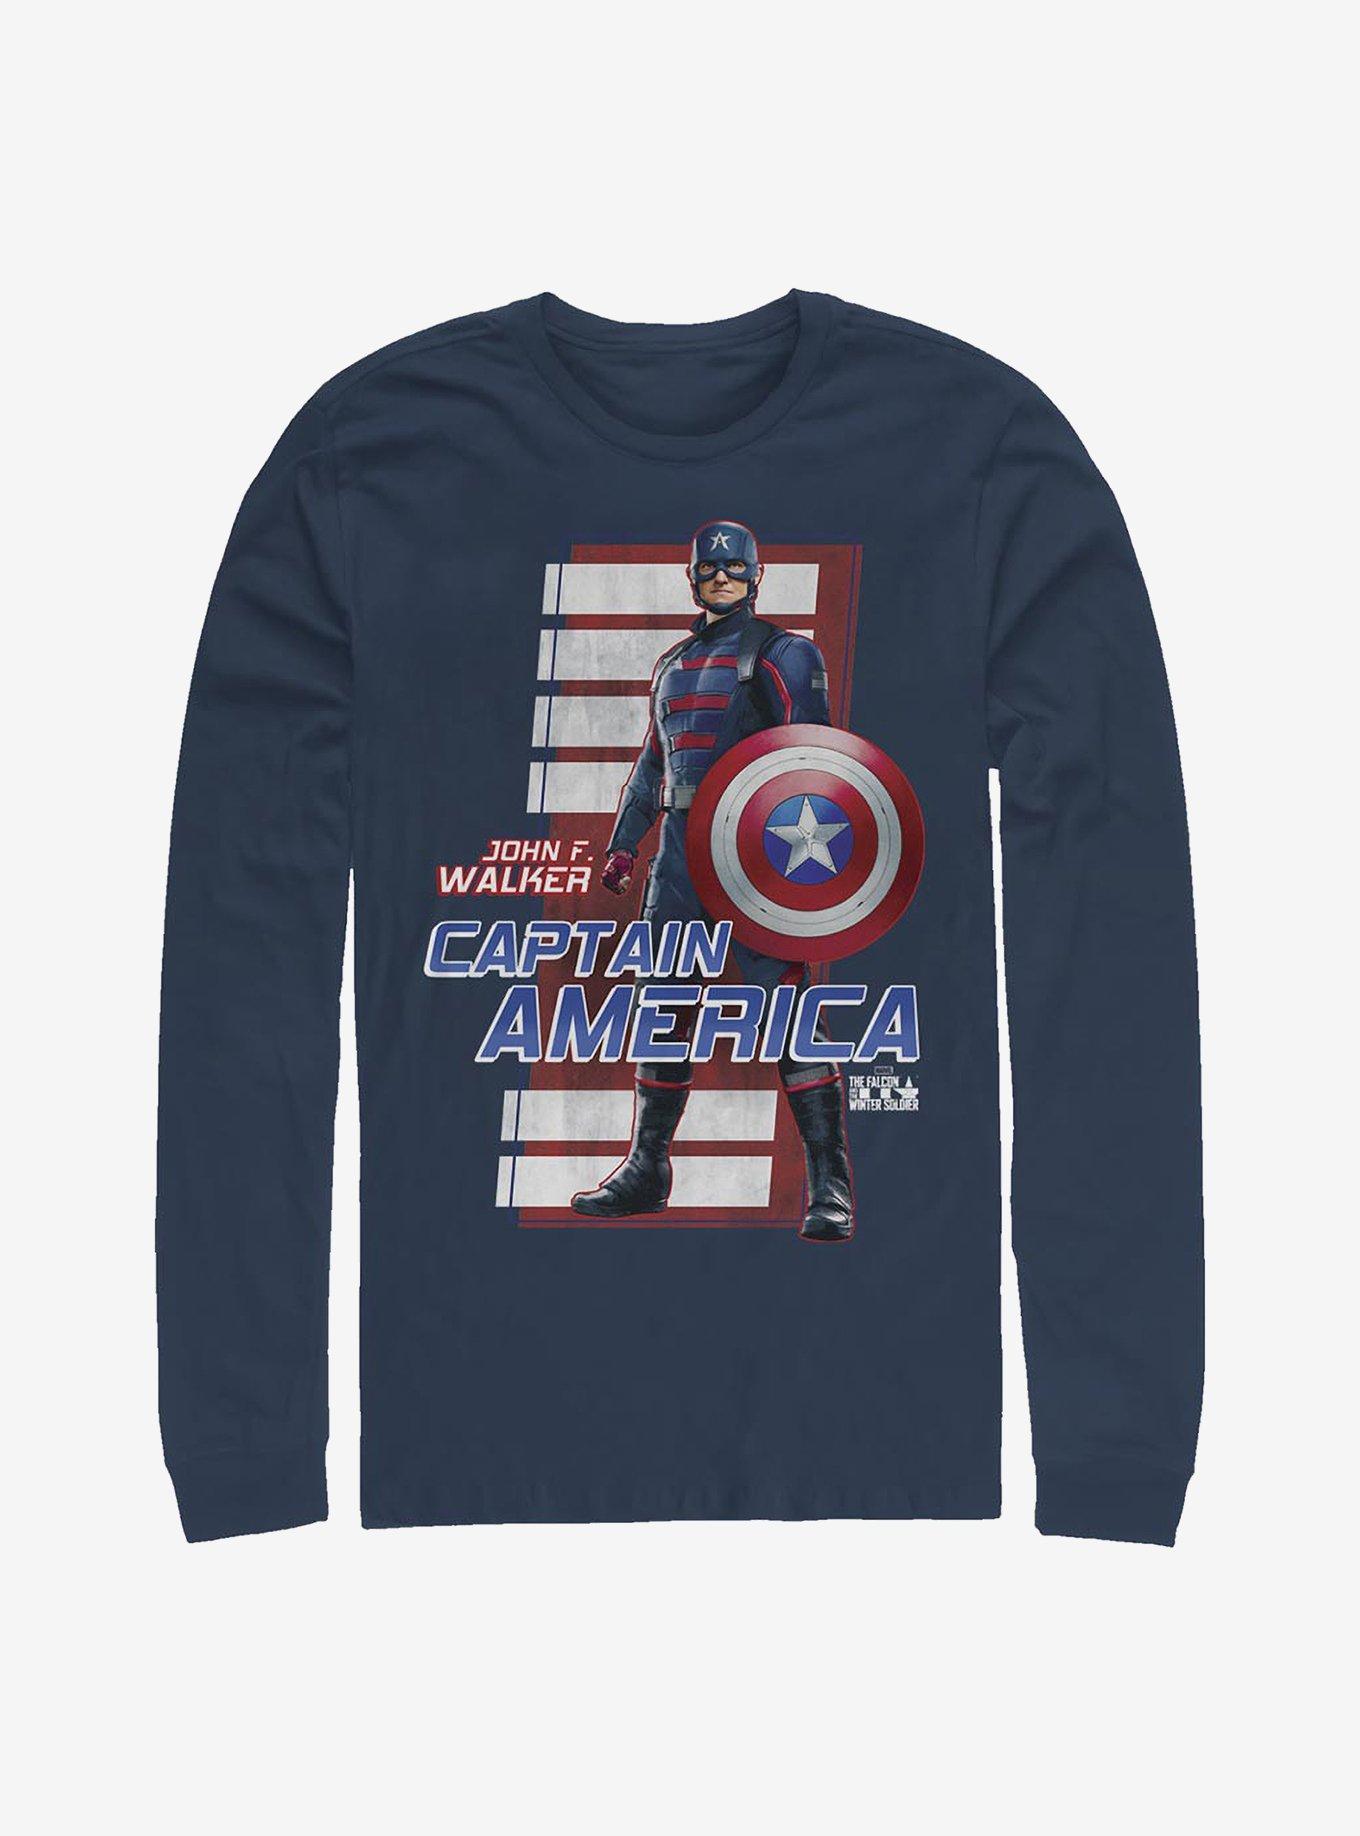 Marvel The Falcon And The Winter Soldier John F. Walker Captain America Long-Sleeve T-Shirt, NAVY, hi-res